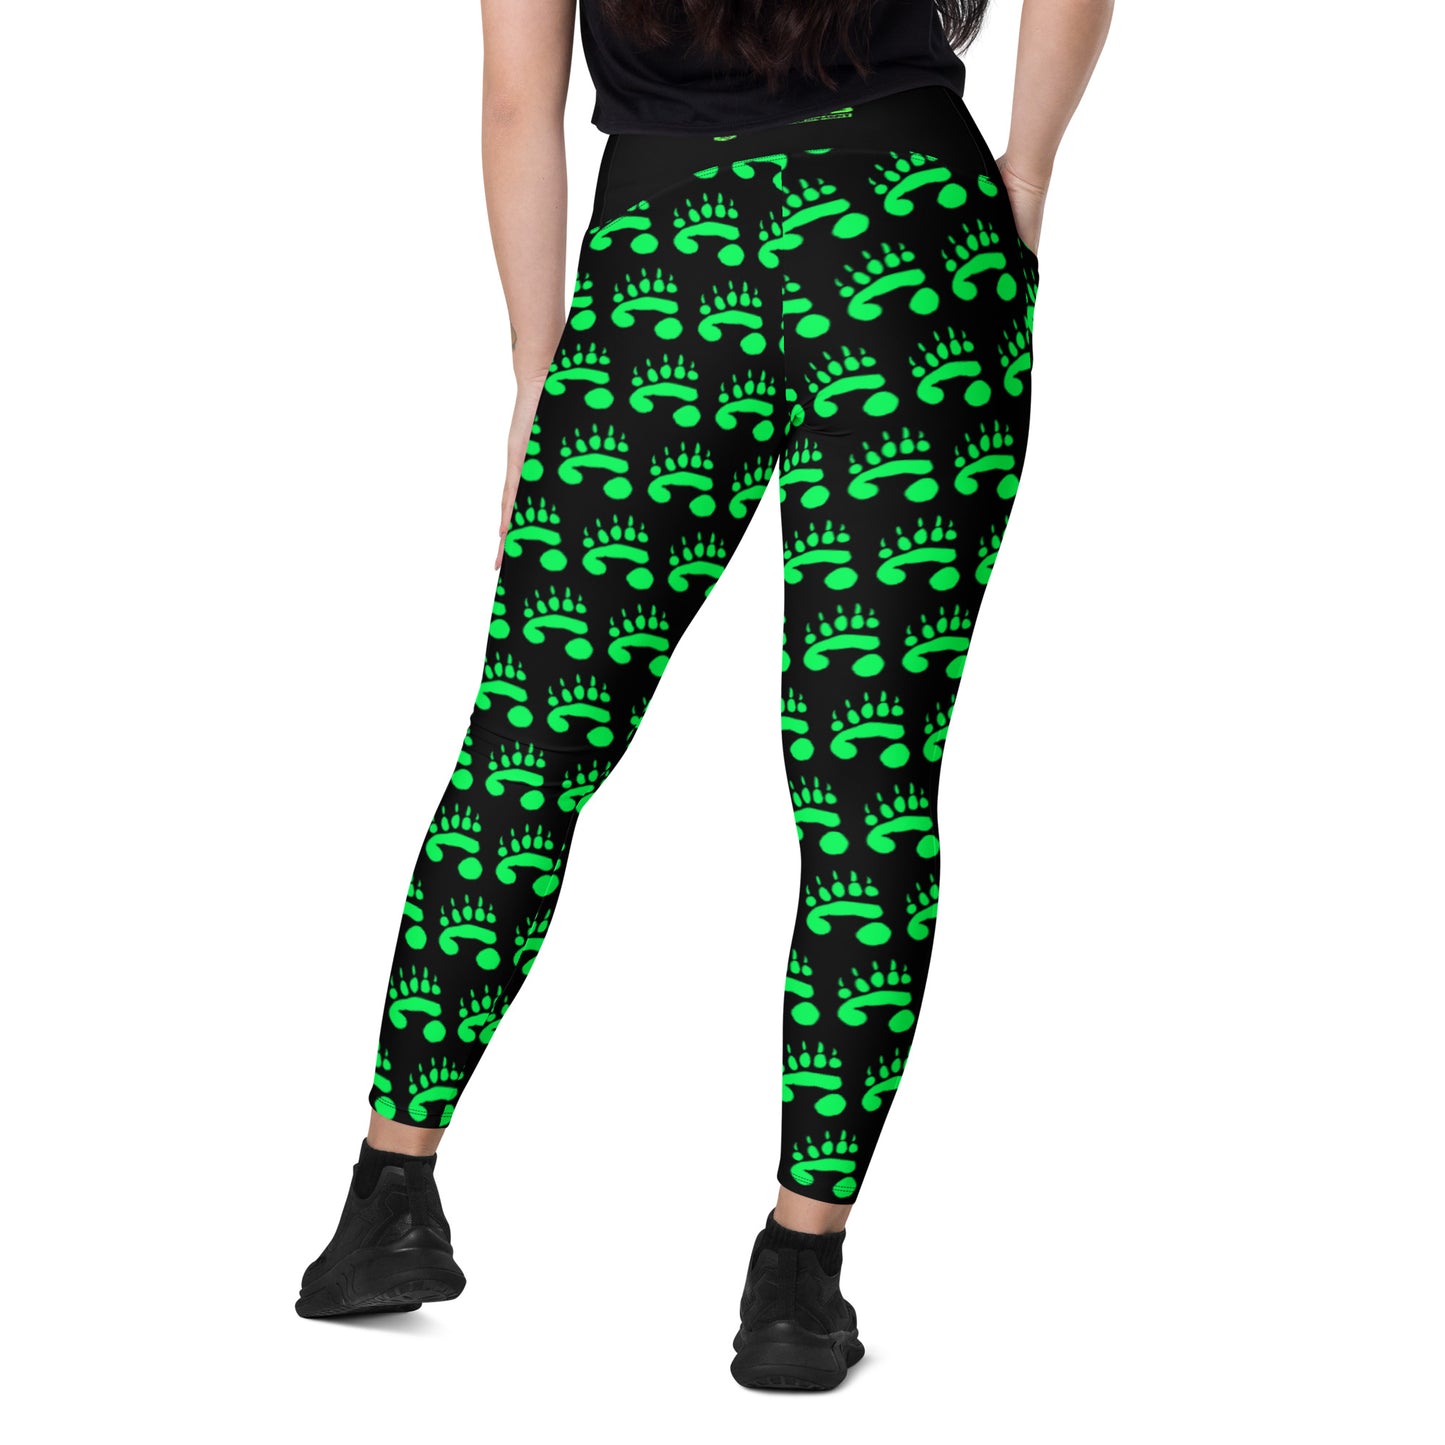 PandaPwr Green Paw Leggings with pockets